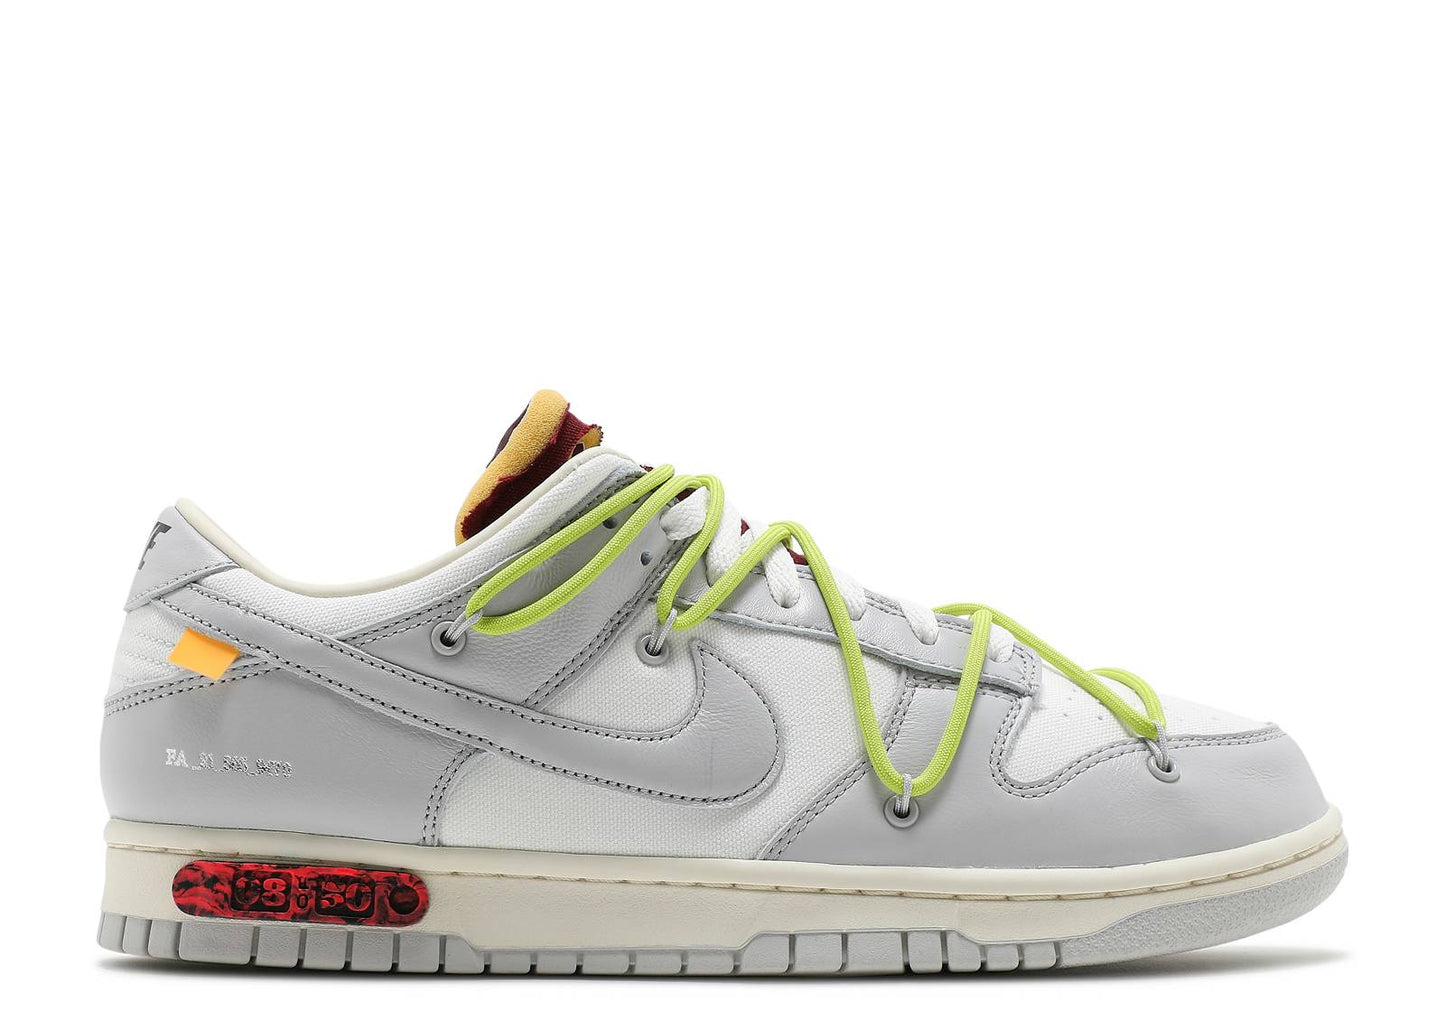 Off-White x Nike Dunk Low "Dear Summer - Lot 08 of 50"